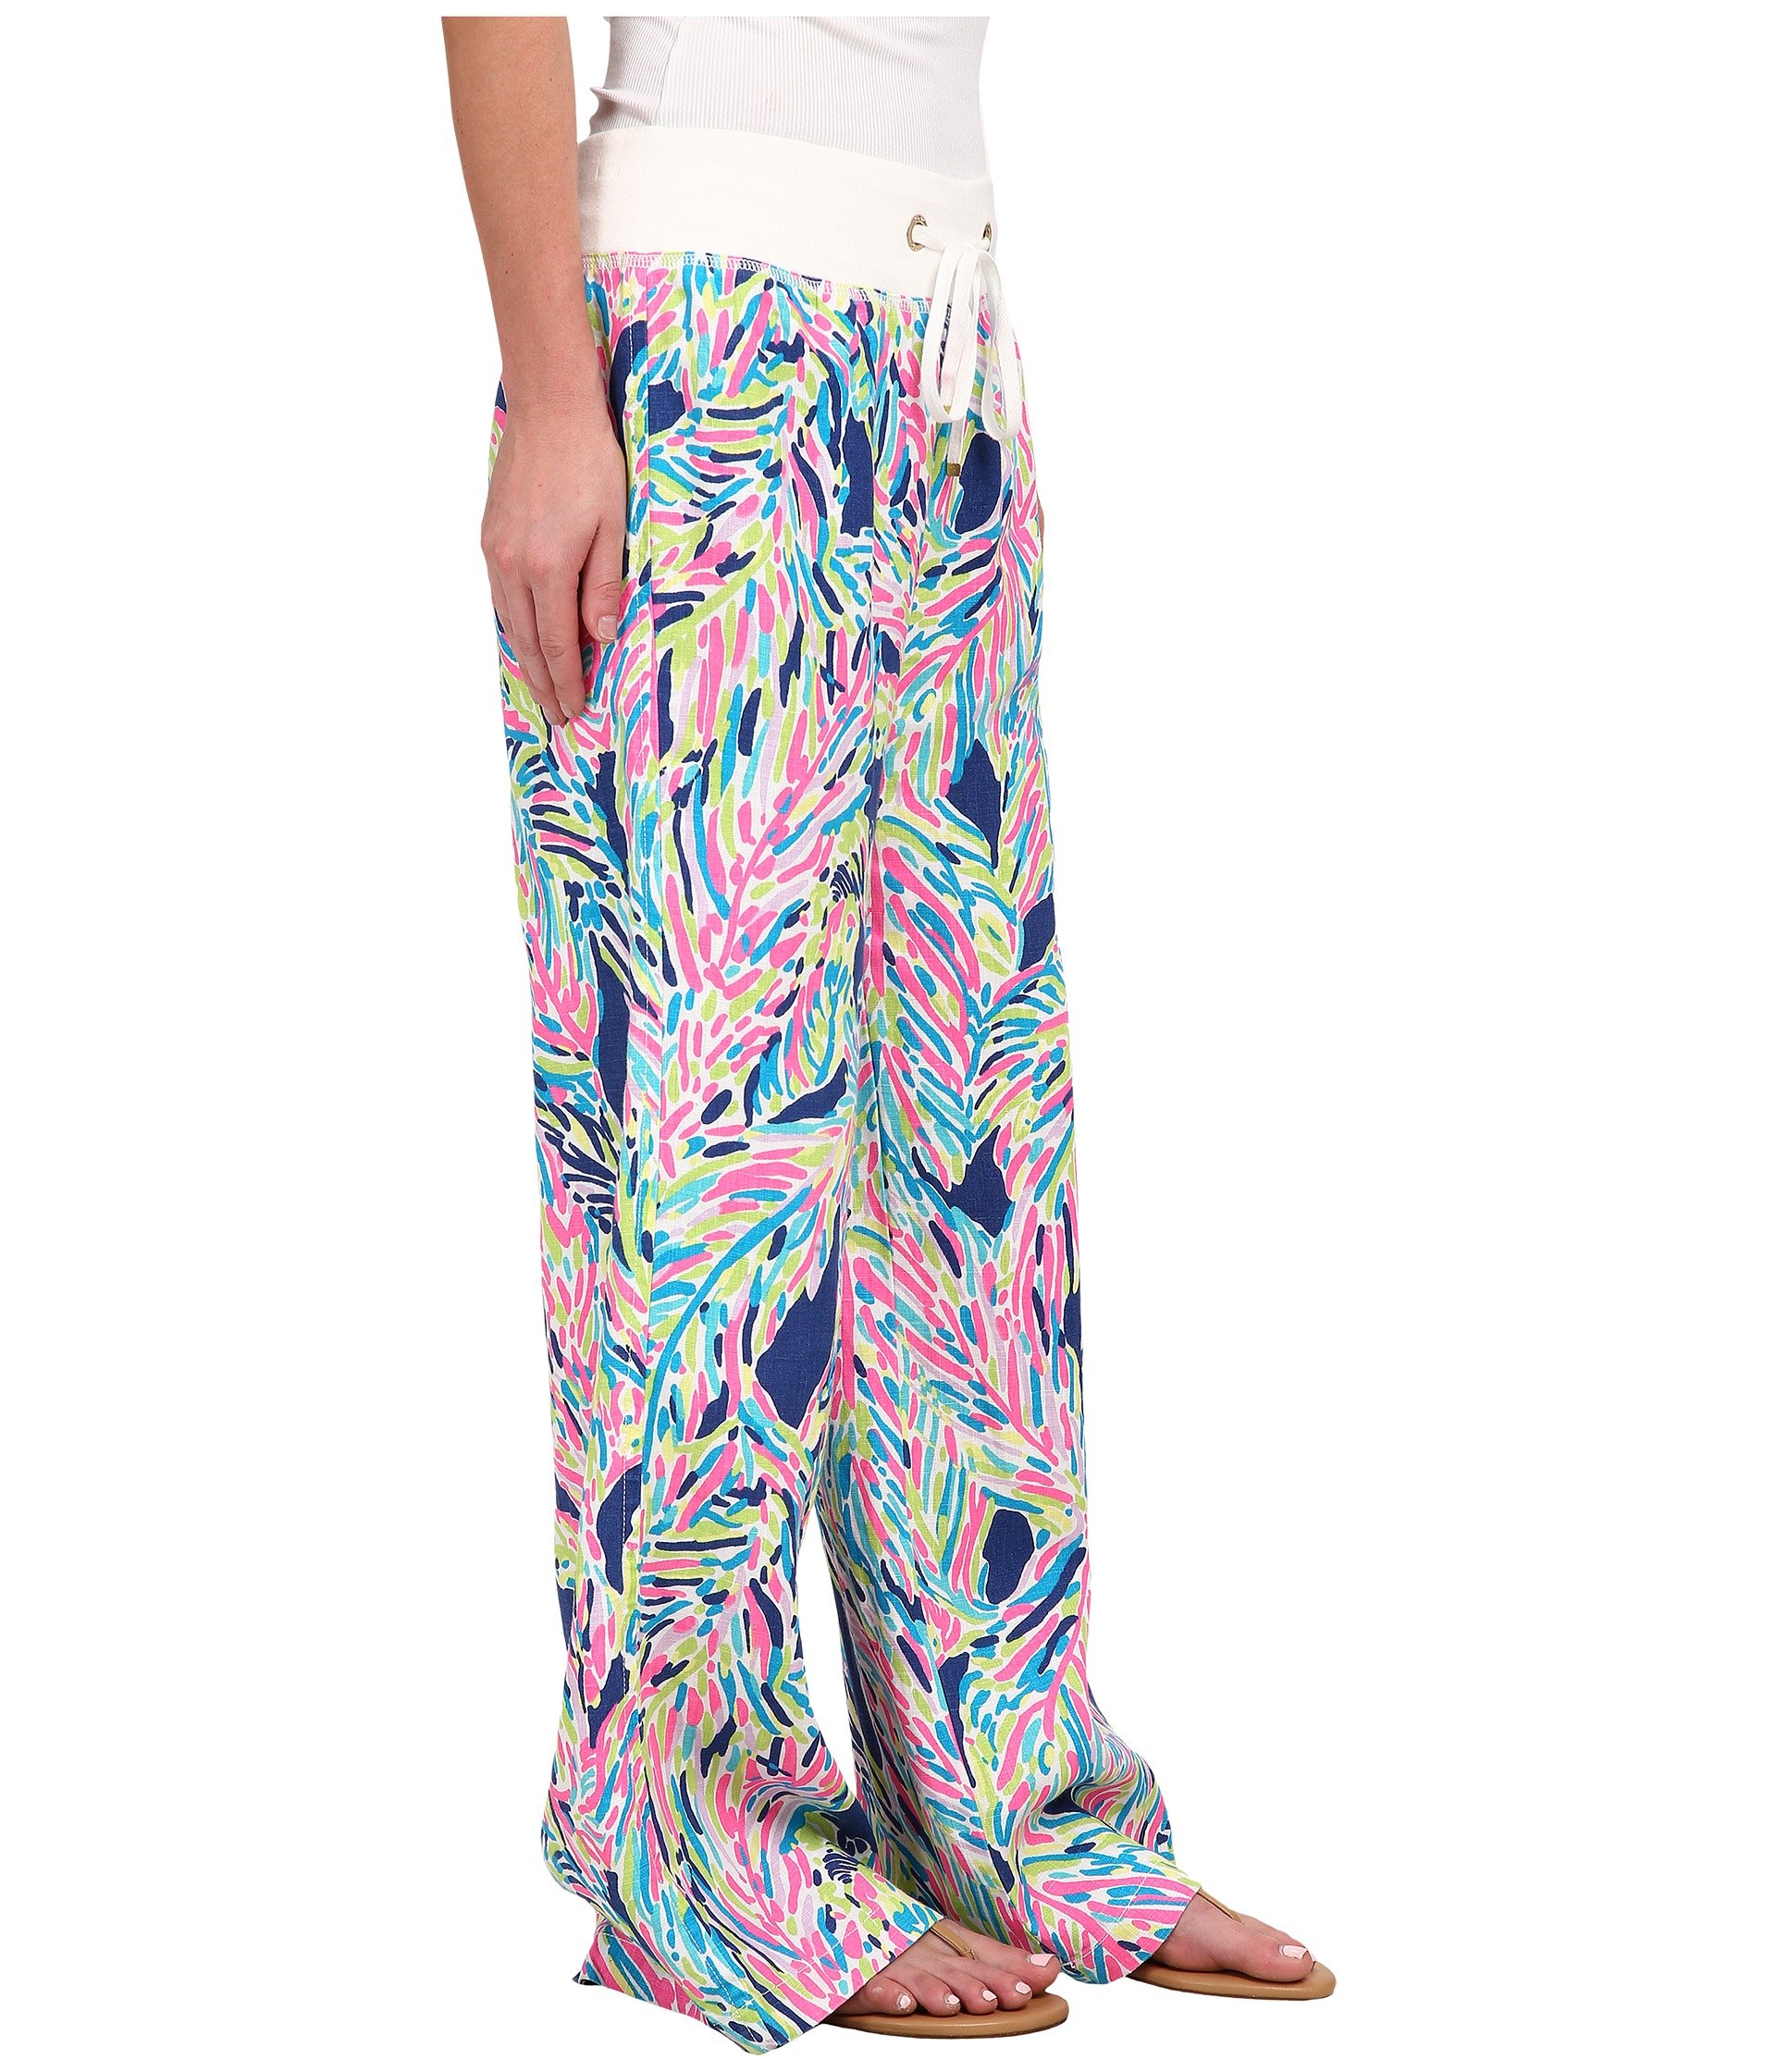 Lyst - Lilly pulitzer Beach Pants in Blue